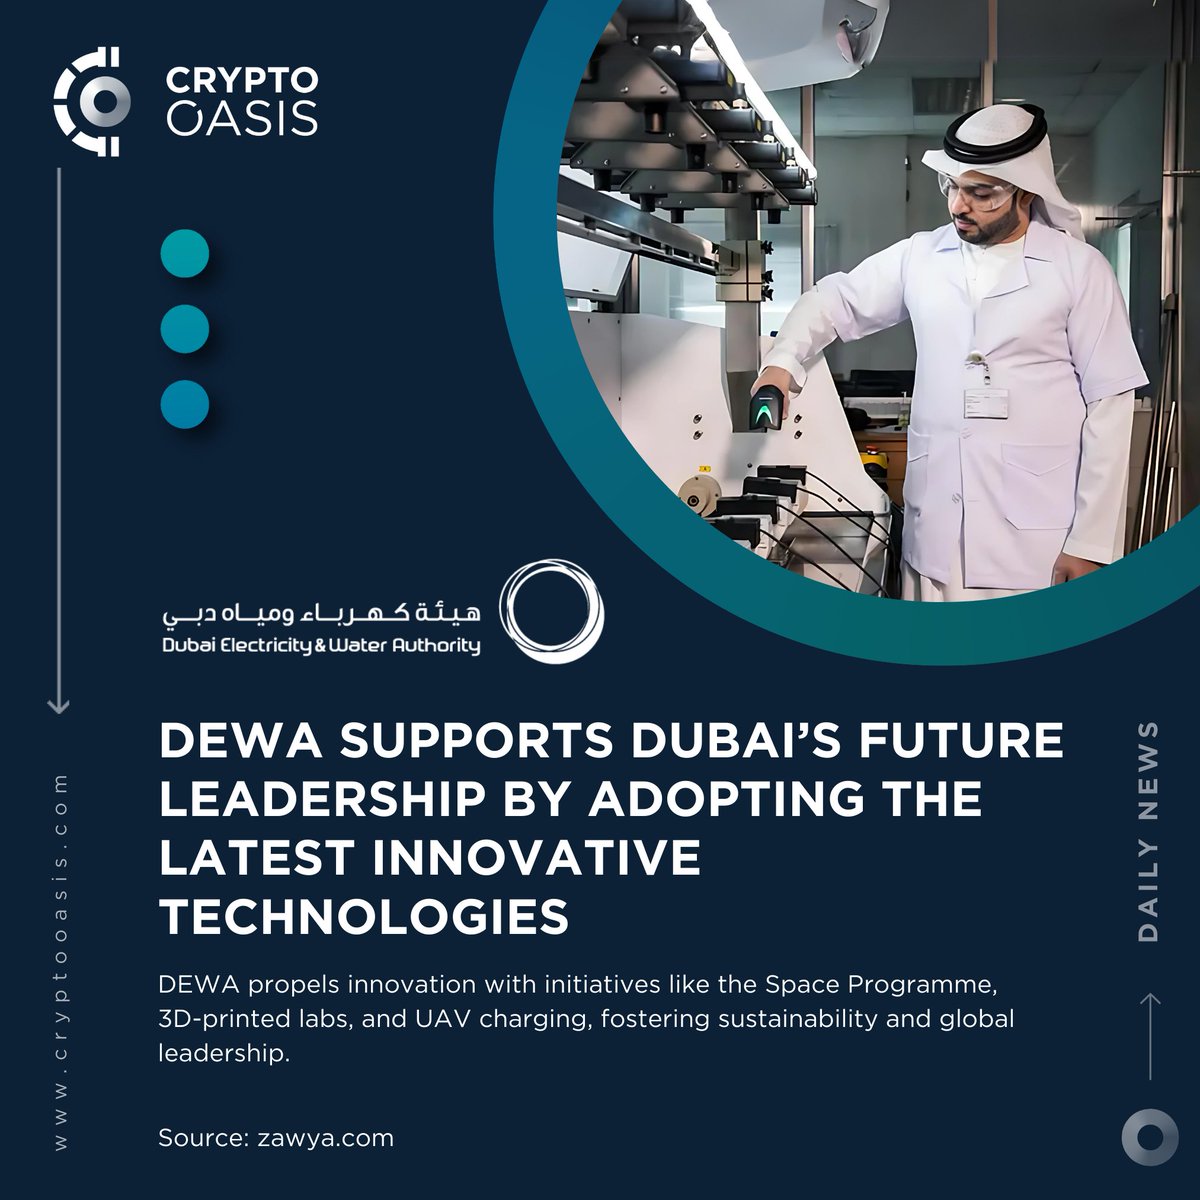 📢 Crypto Oasis Daily News @DEWAOfficial is pioneering the integration of #blockchain, #AI, and #IoT technologies to improve the efficiency and sustainability of its operations, supporting Dubai's vision of future leadership and innovation. tinyurl.com/4bwbxjzf @Zawya